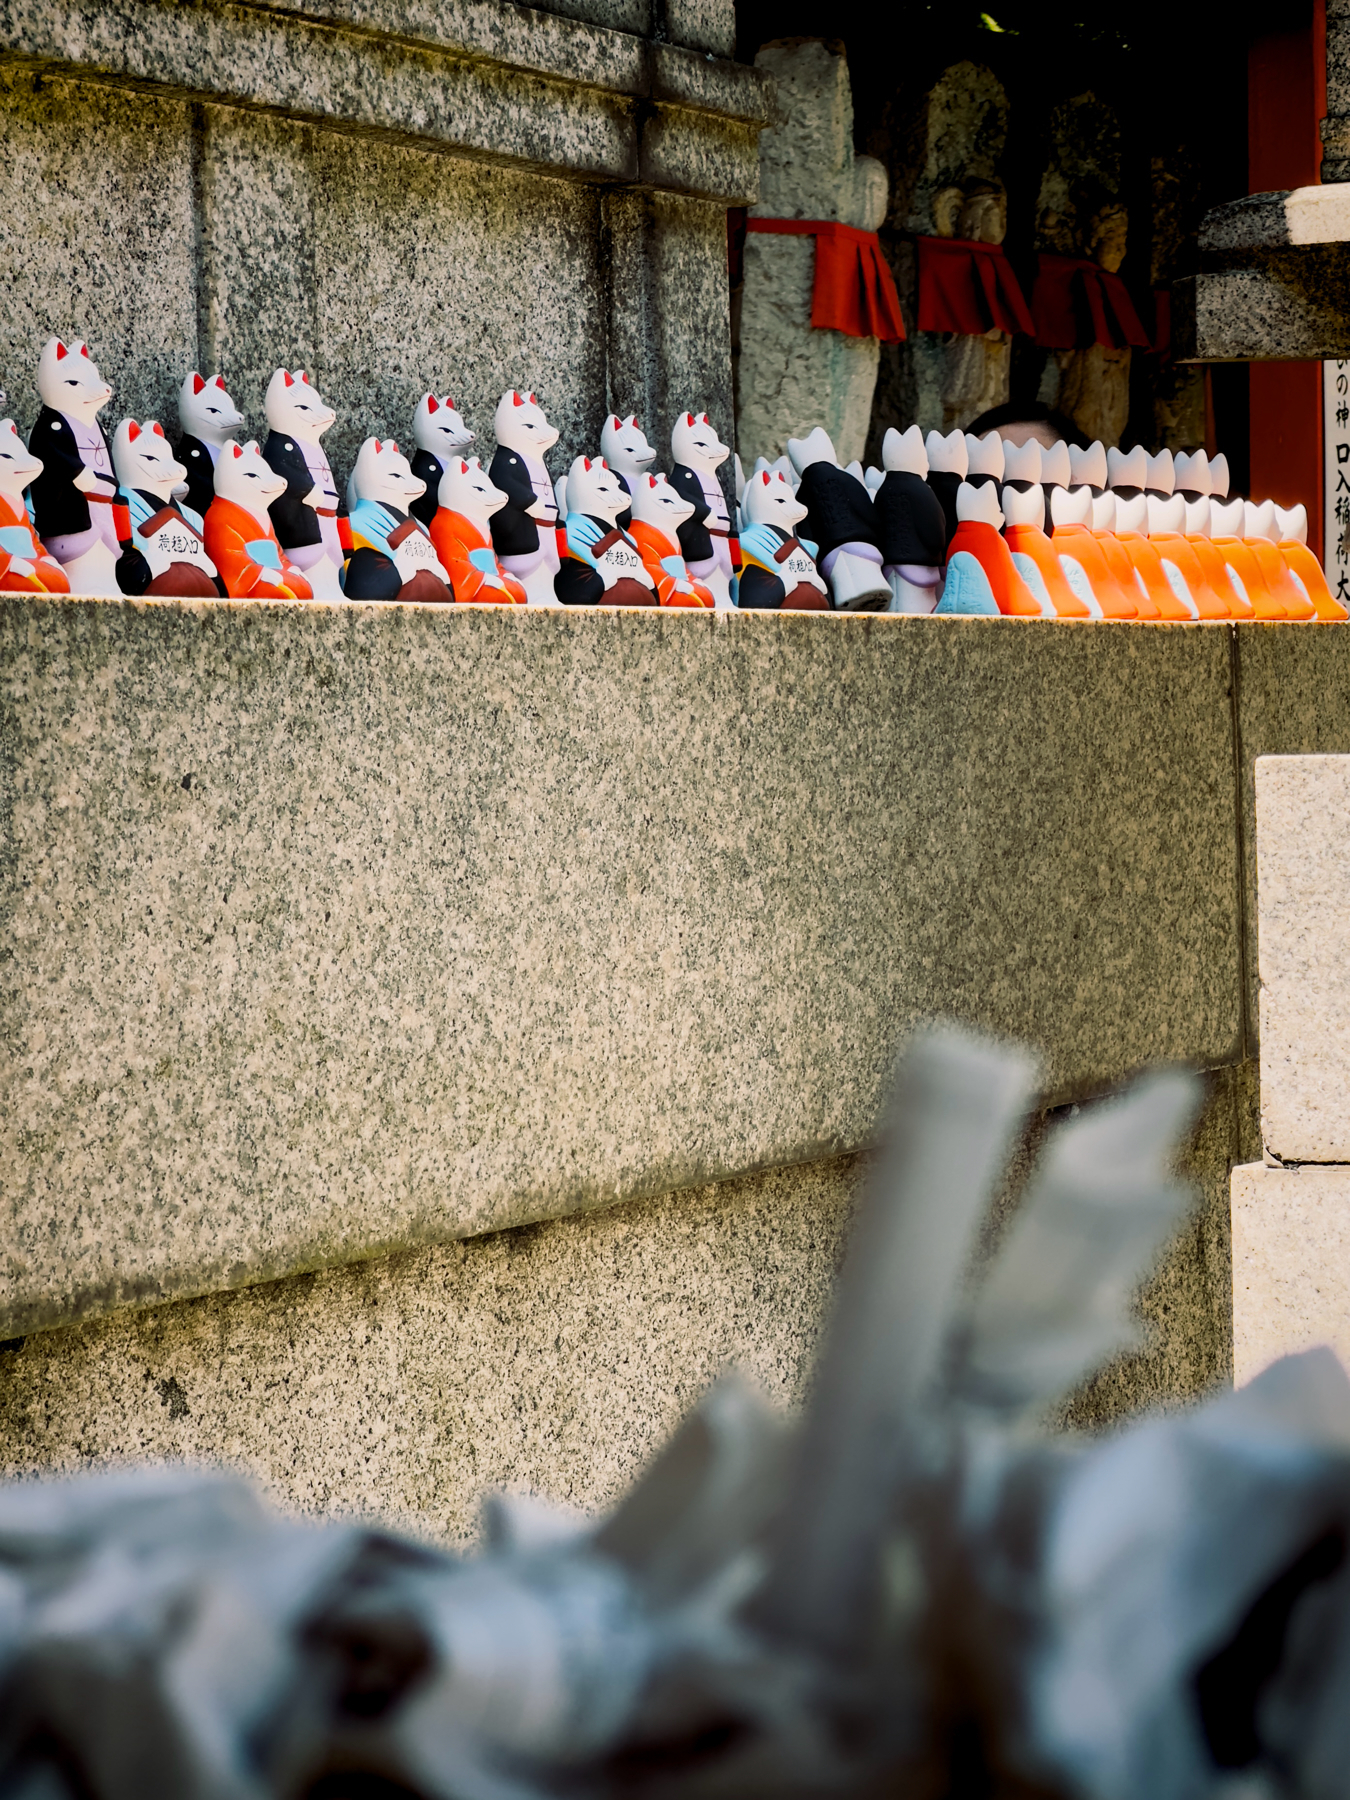 A series of traditional Japanese fox (kitsune) statues wearing red bibs, lined up on a shrine ledge with blurred foreground elements that resemble leaves or paper.